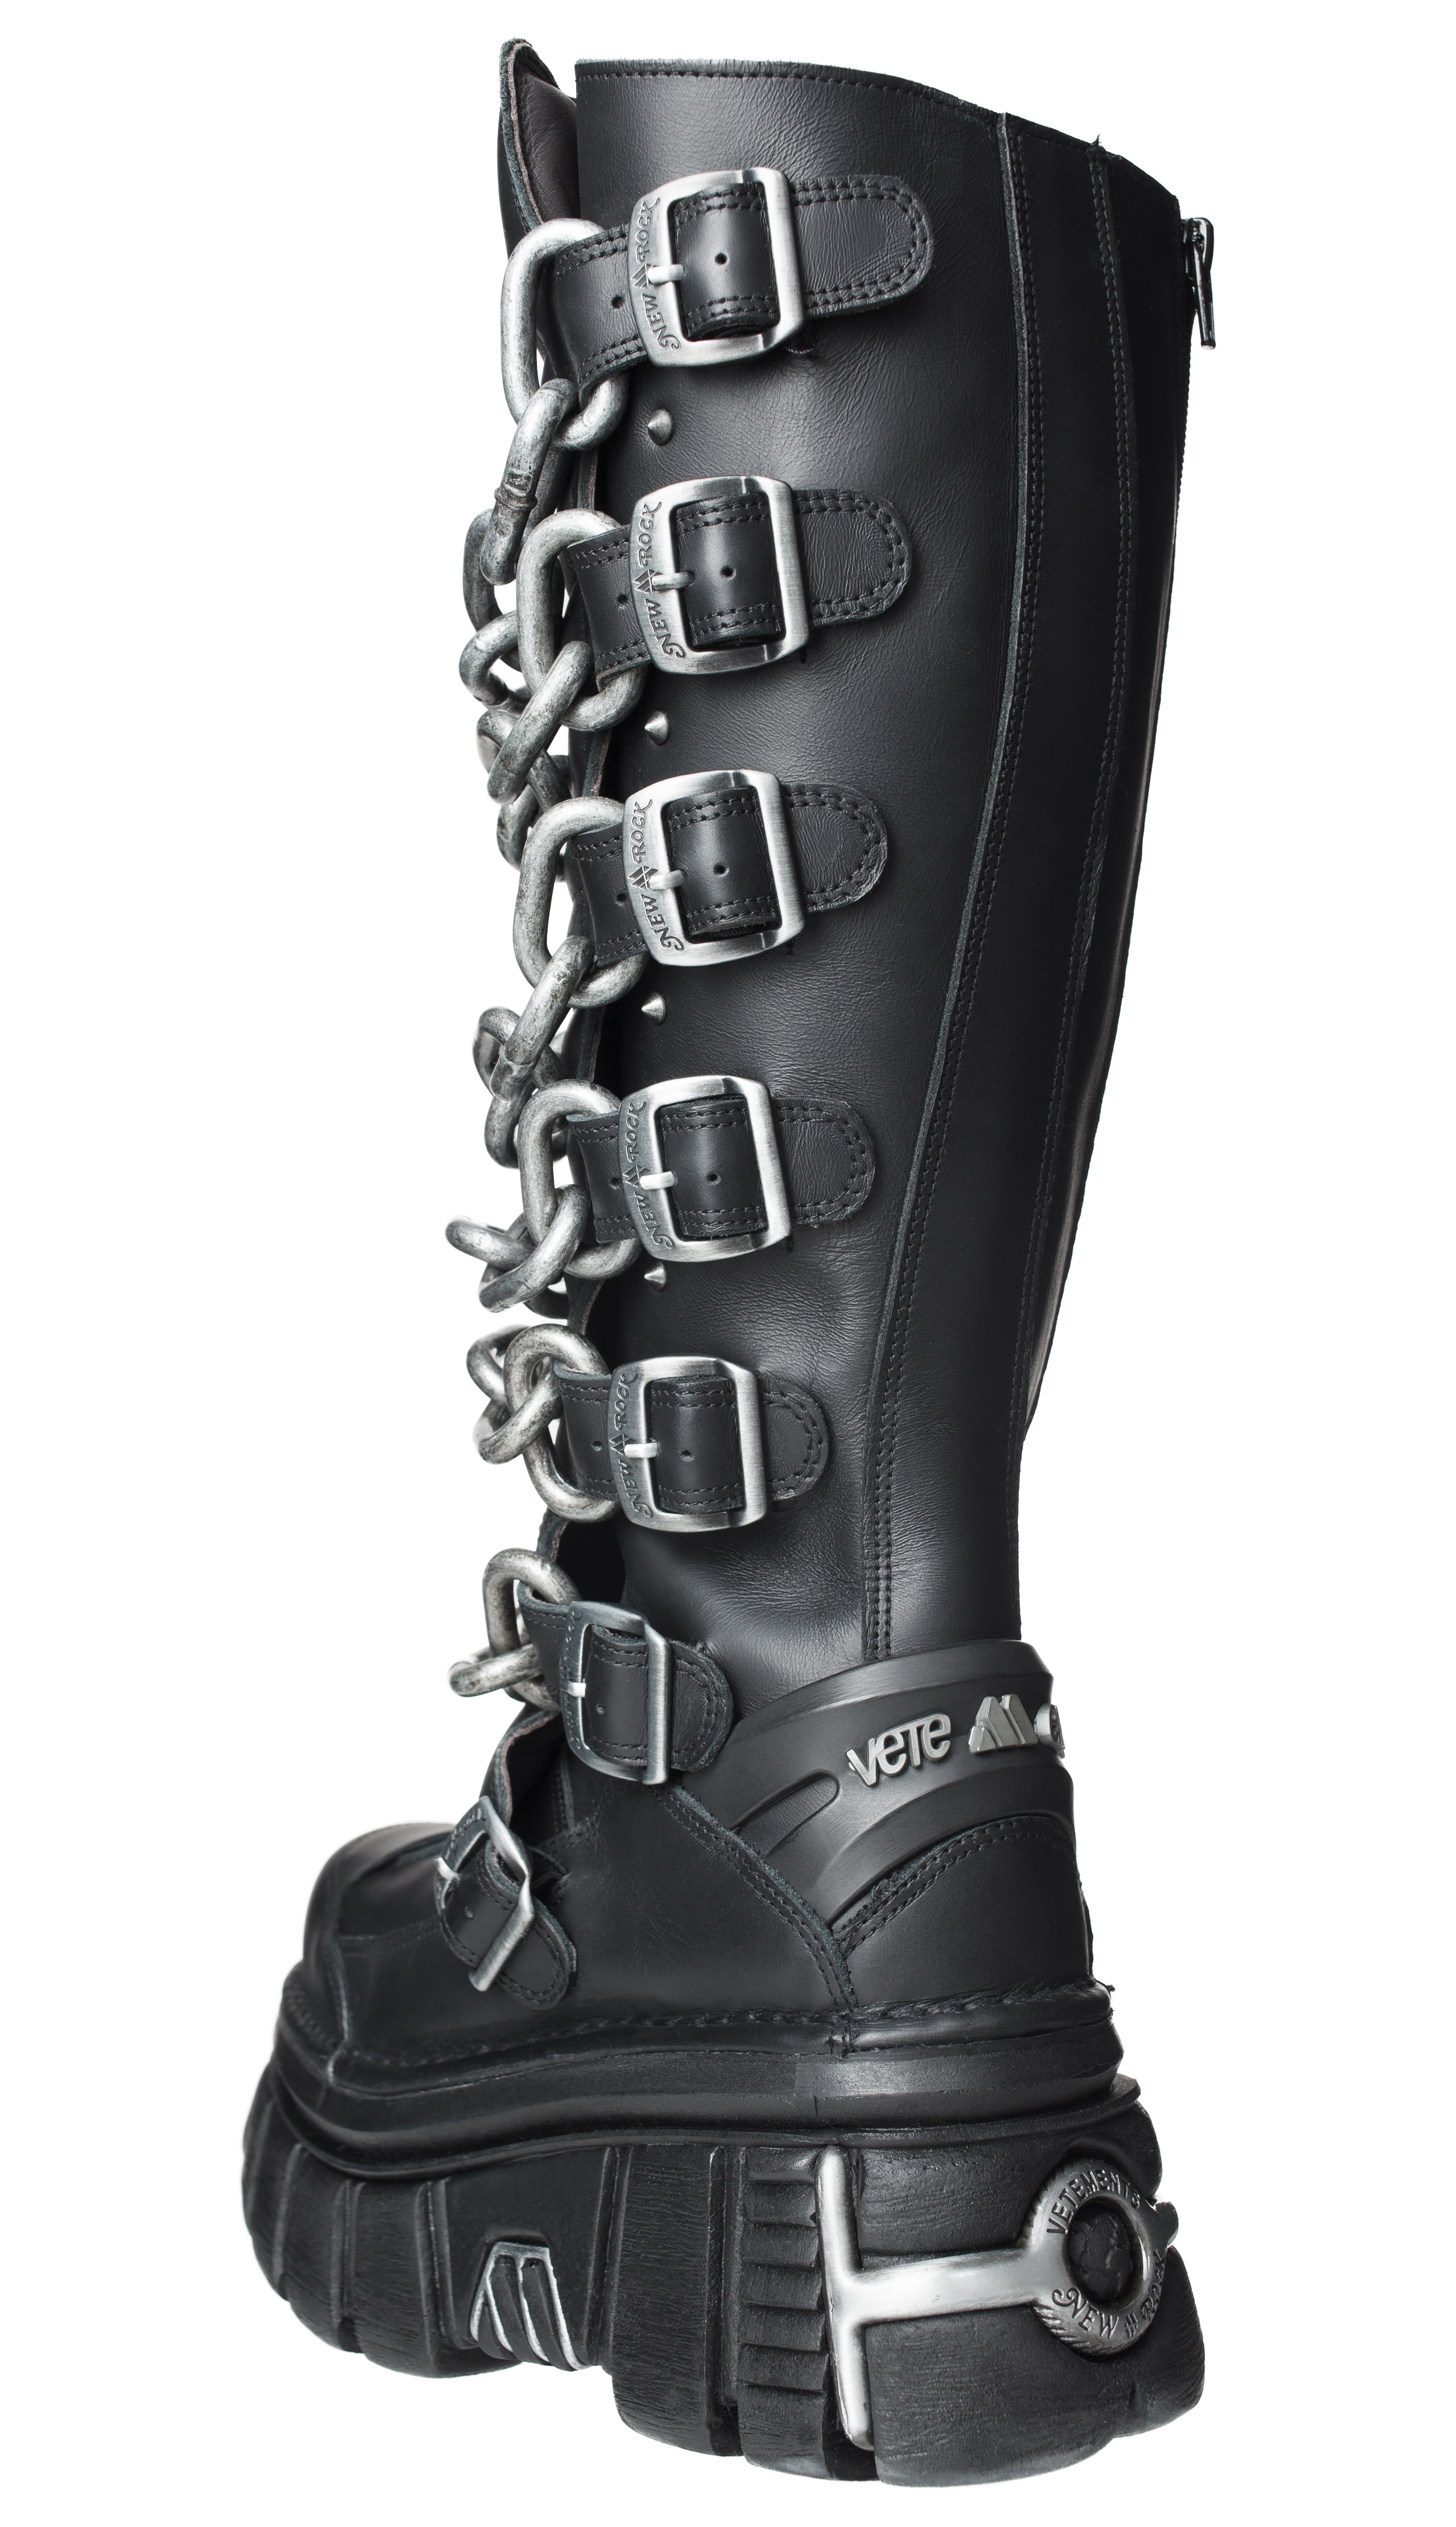 VETEMENTS X NEW ROCK CHAIN LINK BOOTS - 2